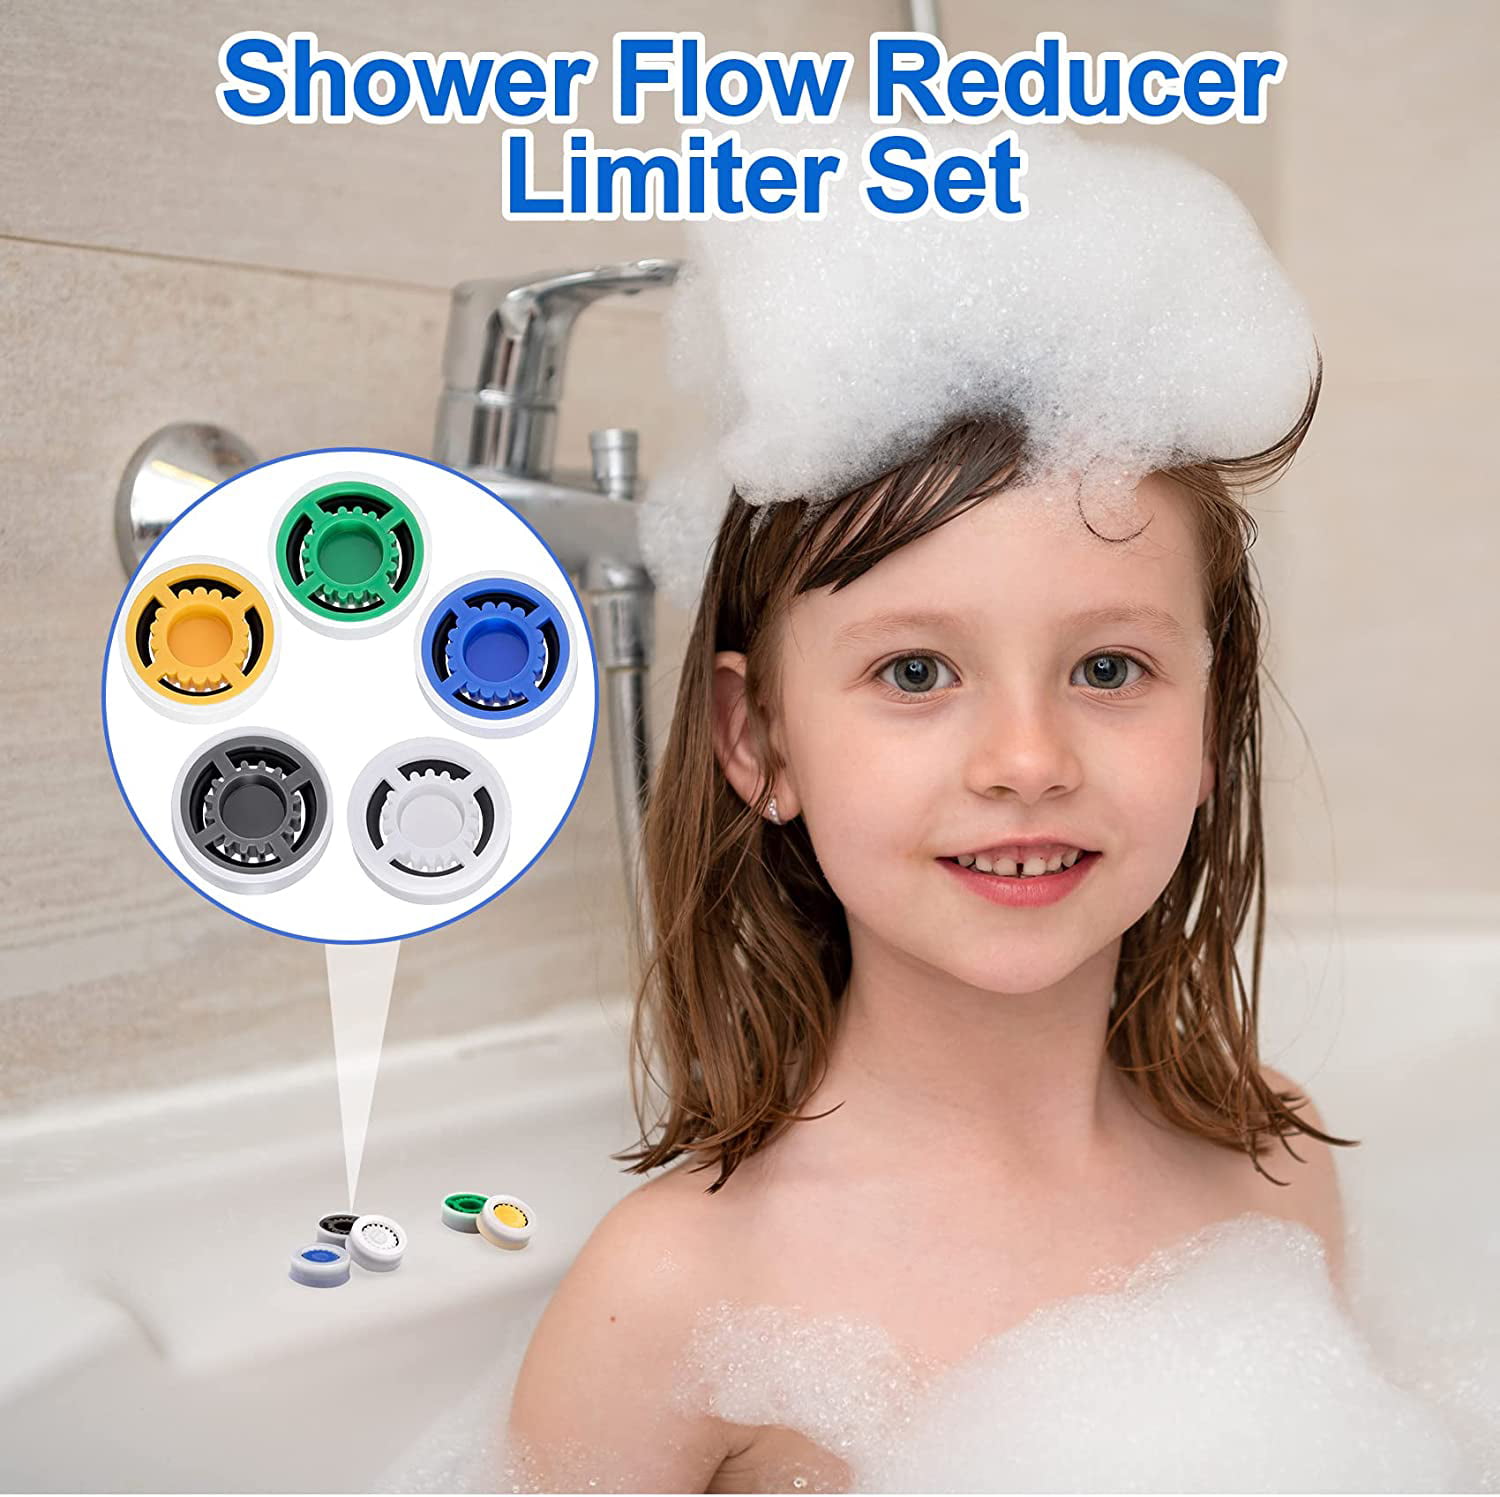 PAGOW 10pcs Shower Flow Reducer Limiter,gpm 1.5 1.8 2.0 2.5 3.0 Shower Head Flow Restrictor,Shower Head Water Saver Adapter Set for Handheld Shower,Bathroom,Toilet 0.56x0.54x0.21inch 